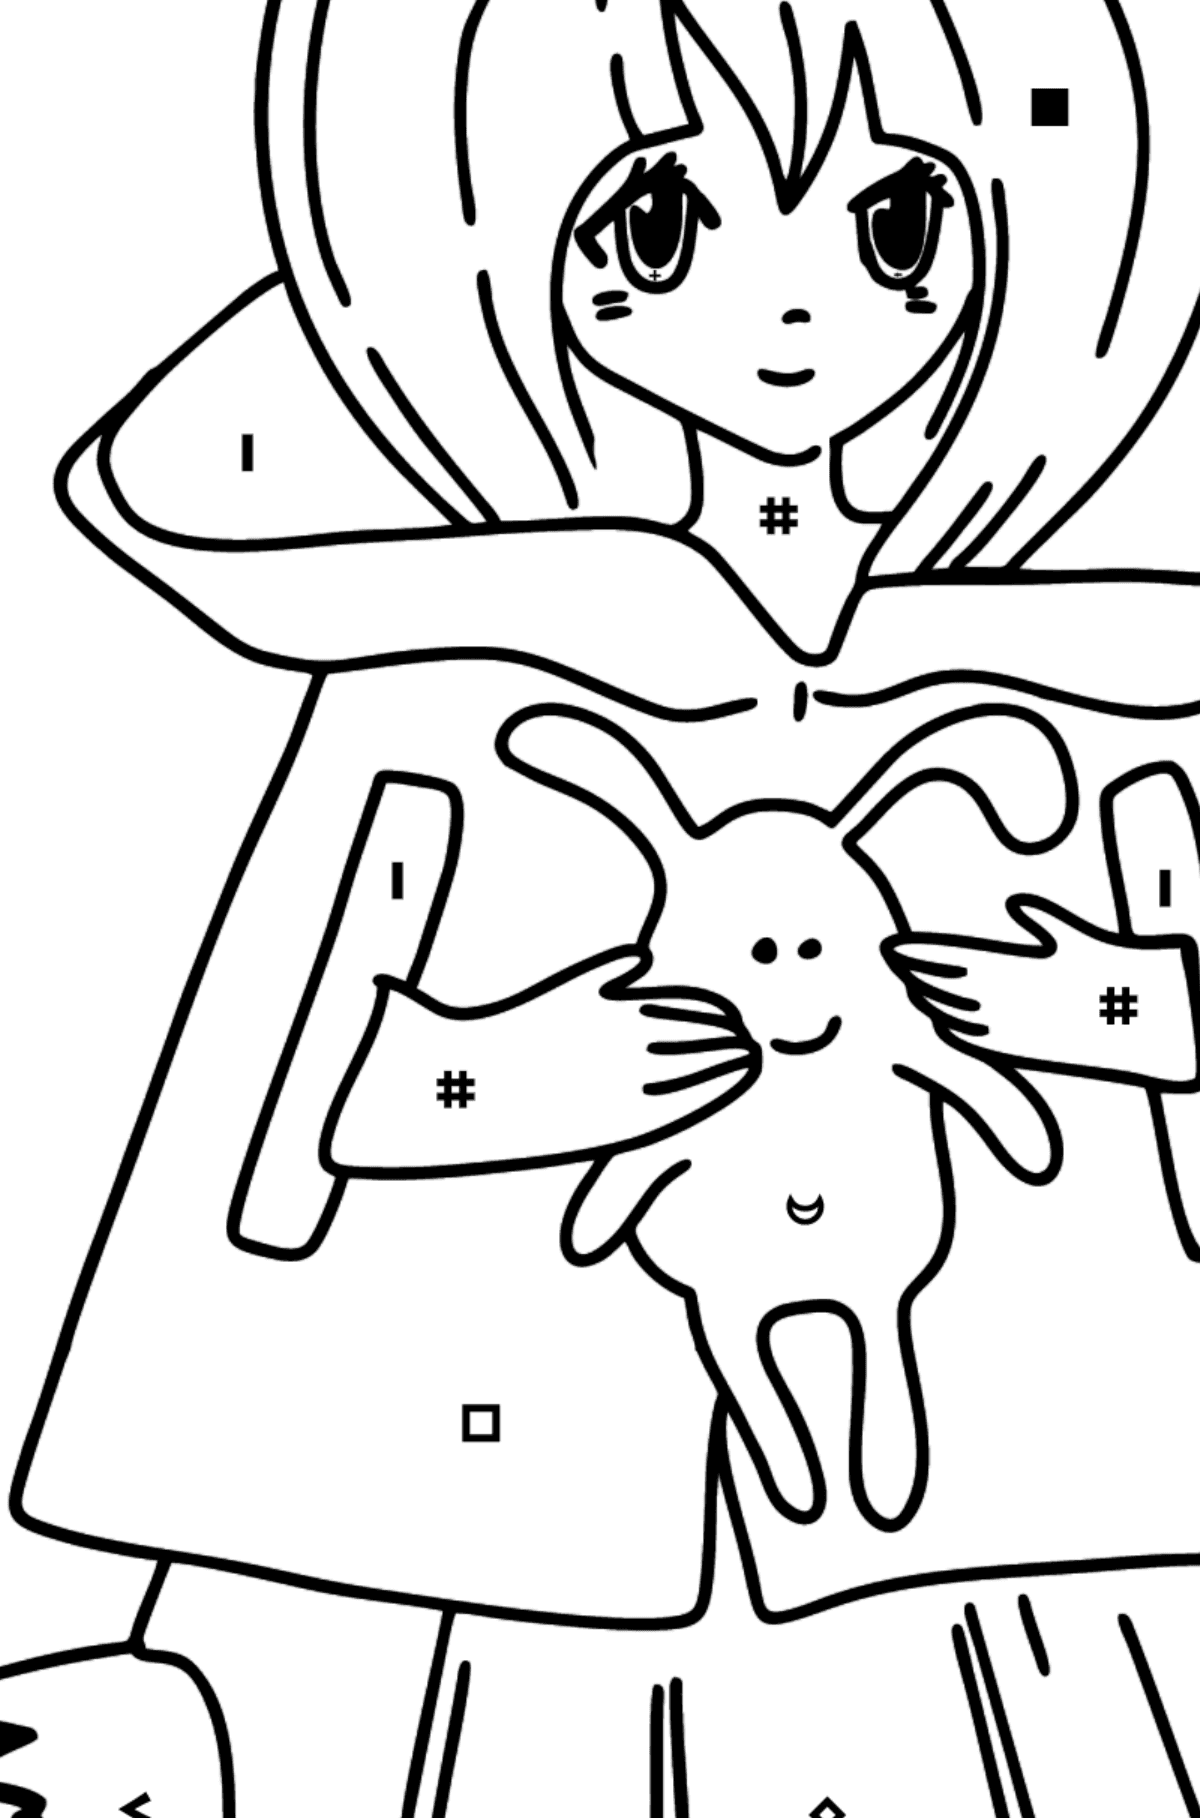 Anime Girl with Tail coloring page - Coloring by Symbols for Kids